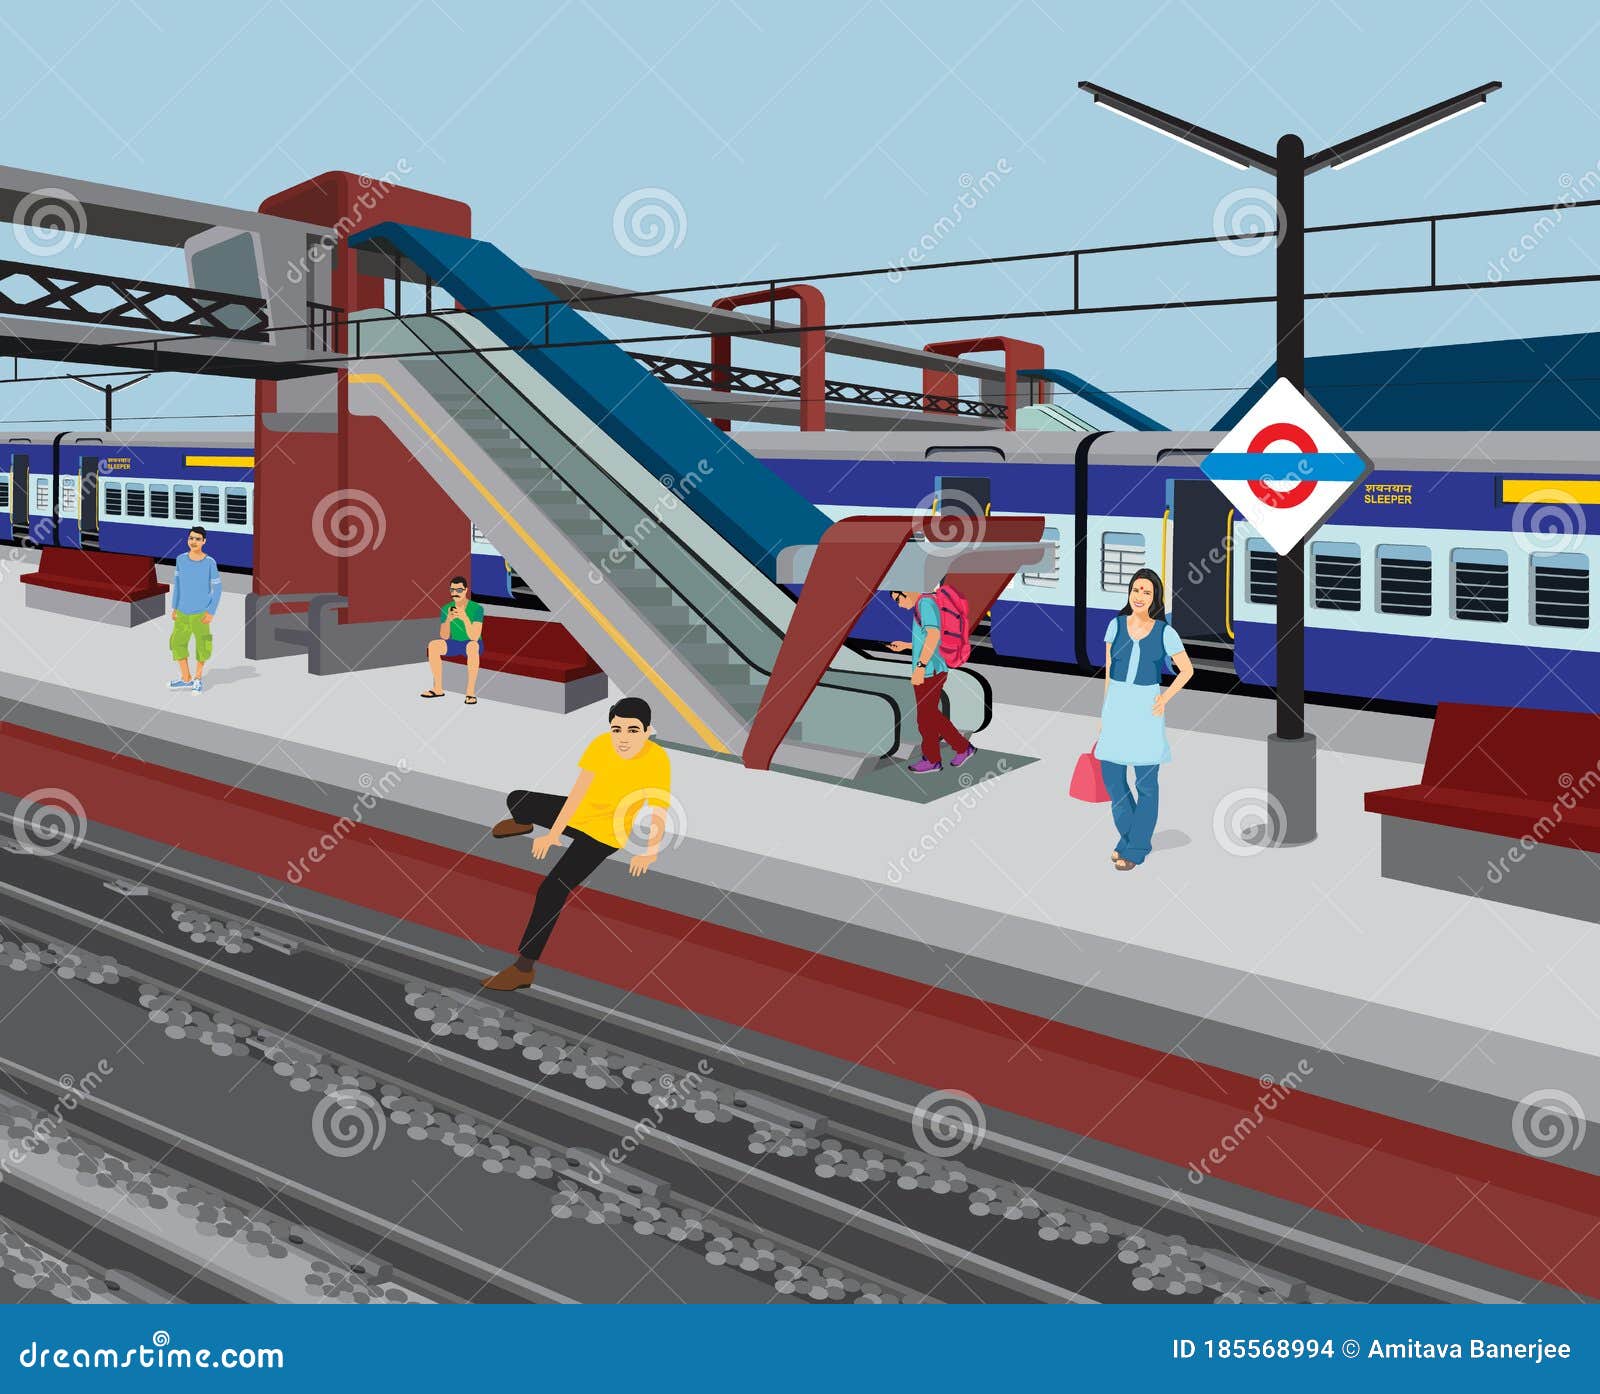 Illustration of tracks and platforms of a train station